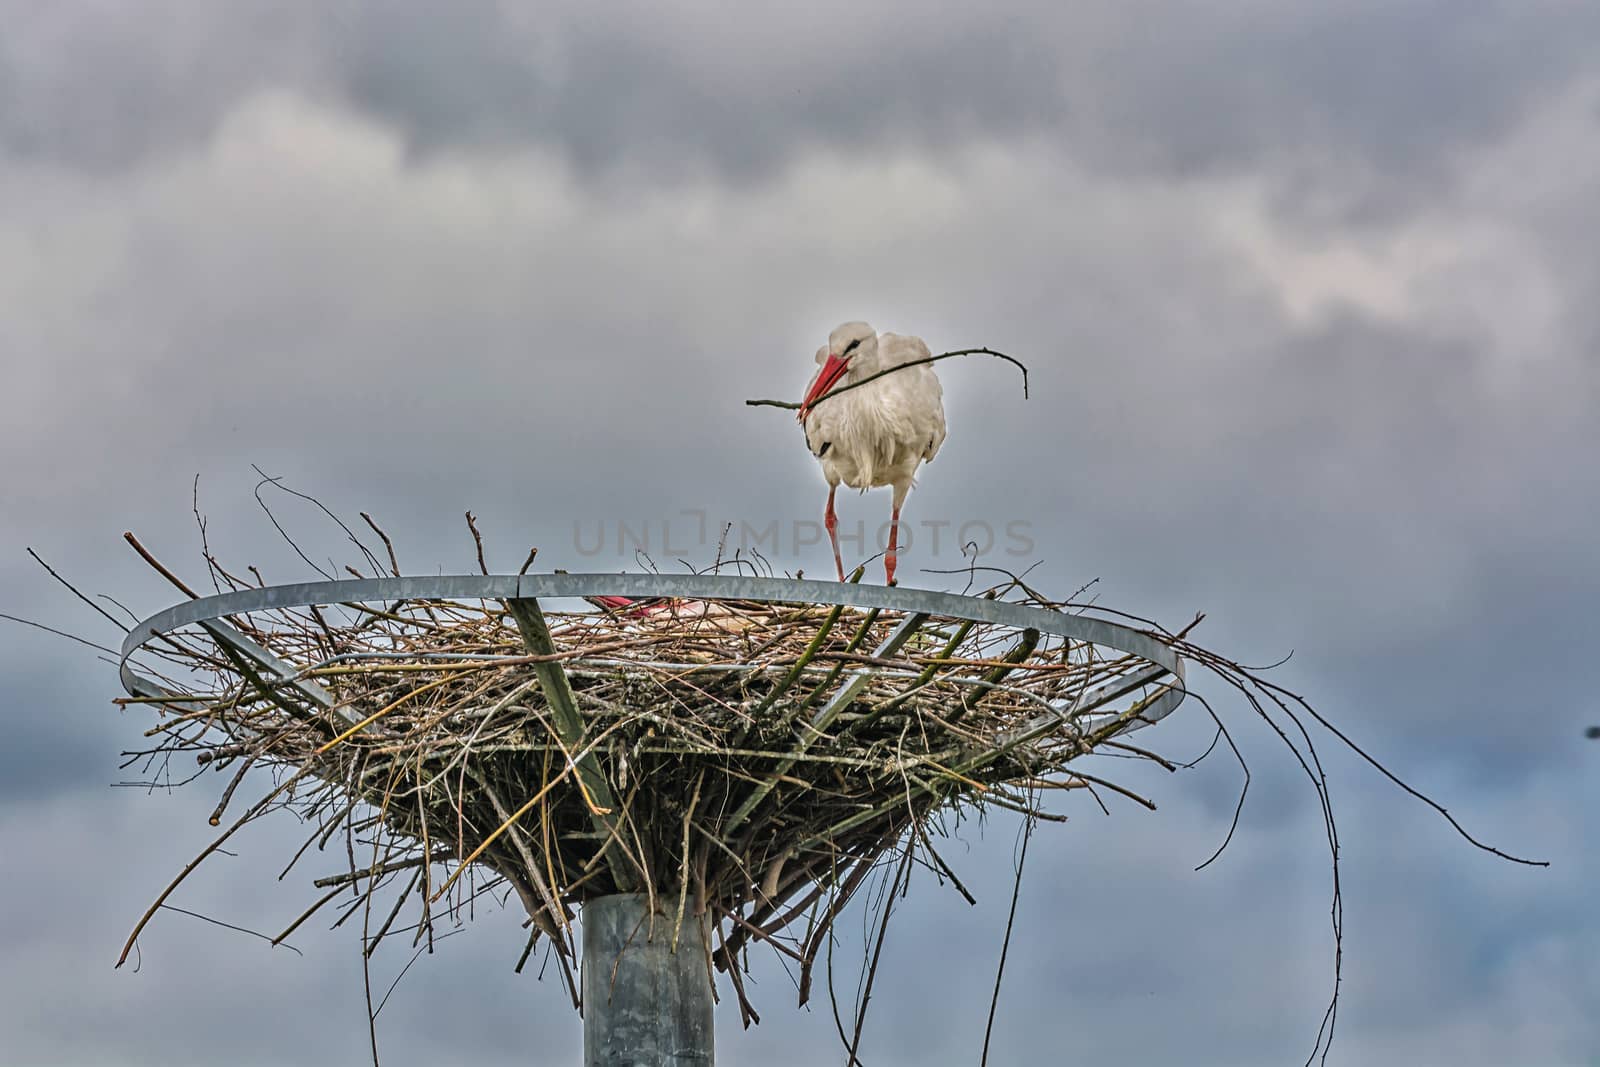 HDR processing. Artistic work of my own.
Close up two storks on the nest before dramatic sky